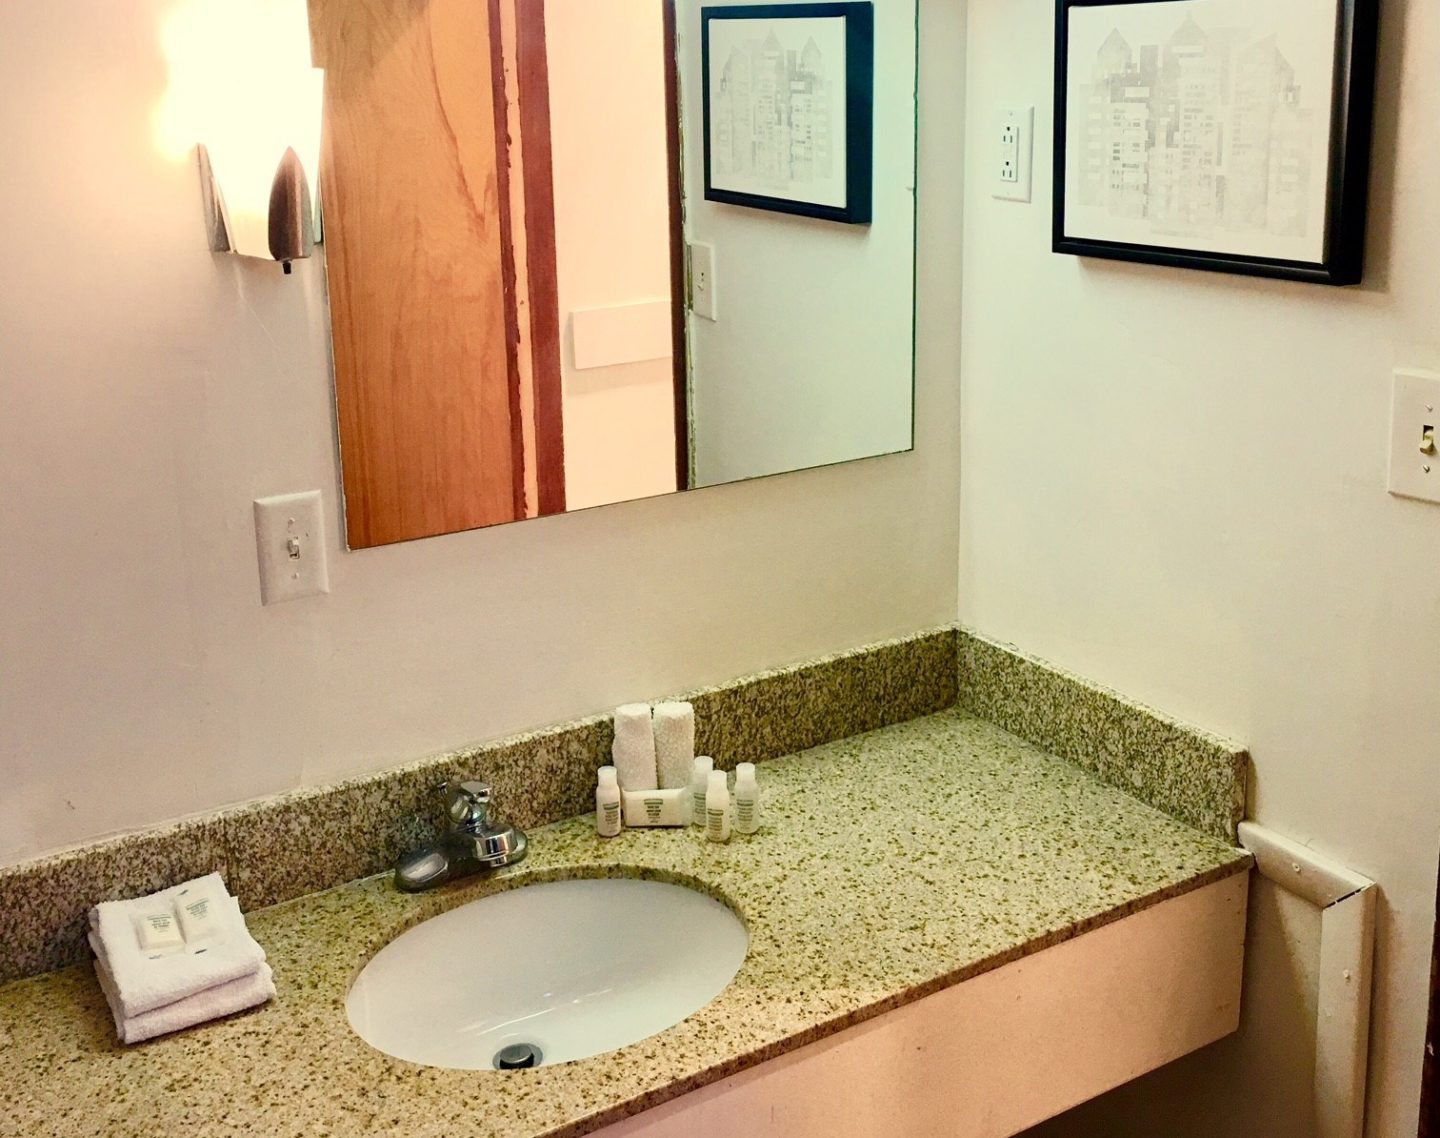 Vanity unit with sink, bathroom amenities, wall mounted mirror and light